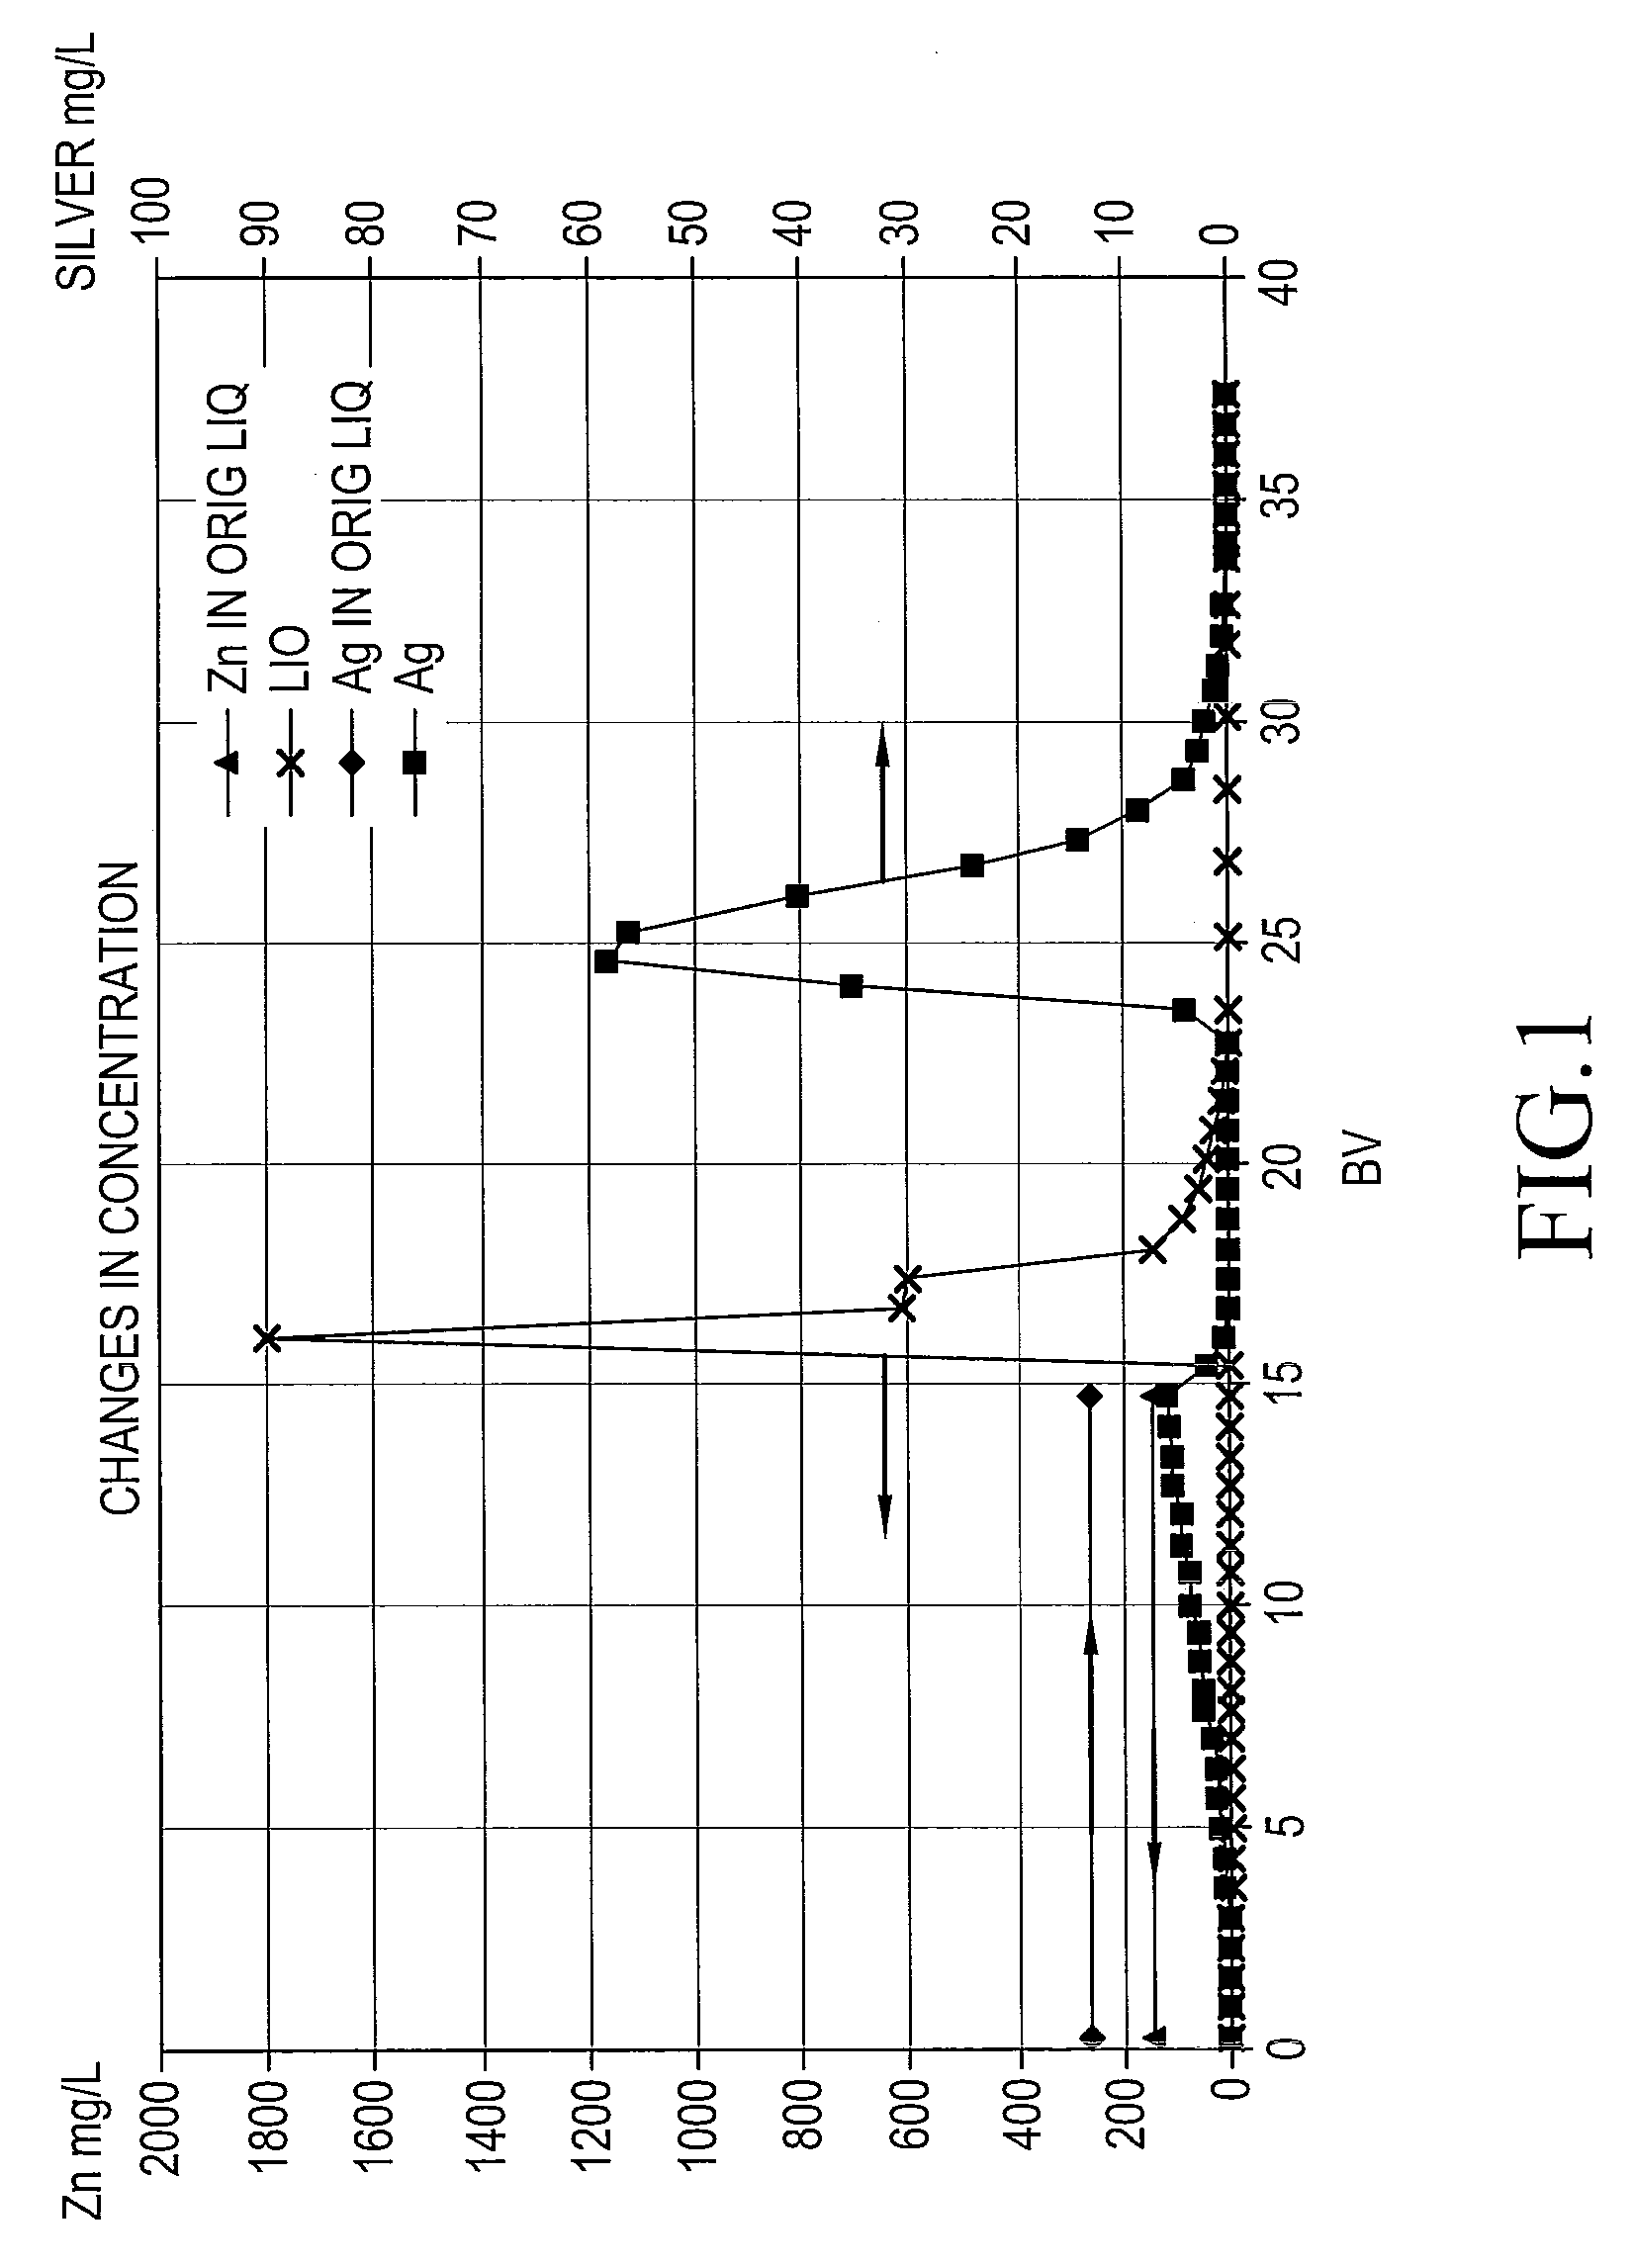 Method of recovering silver using anion-exchange resin